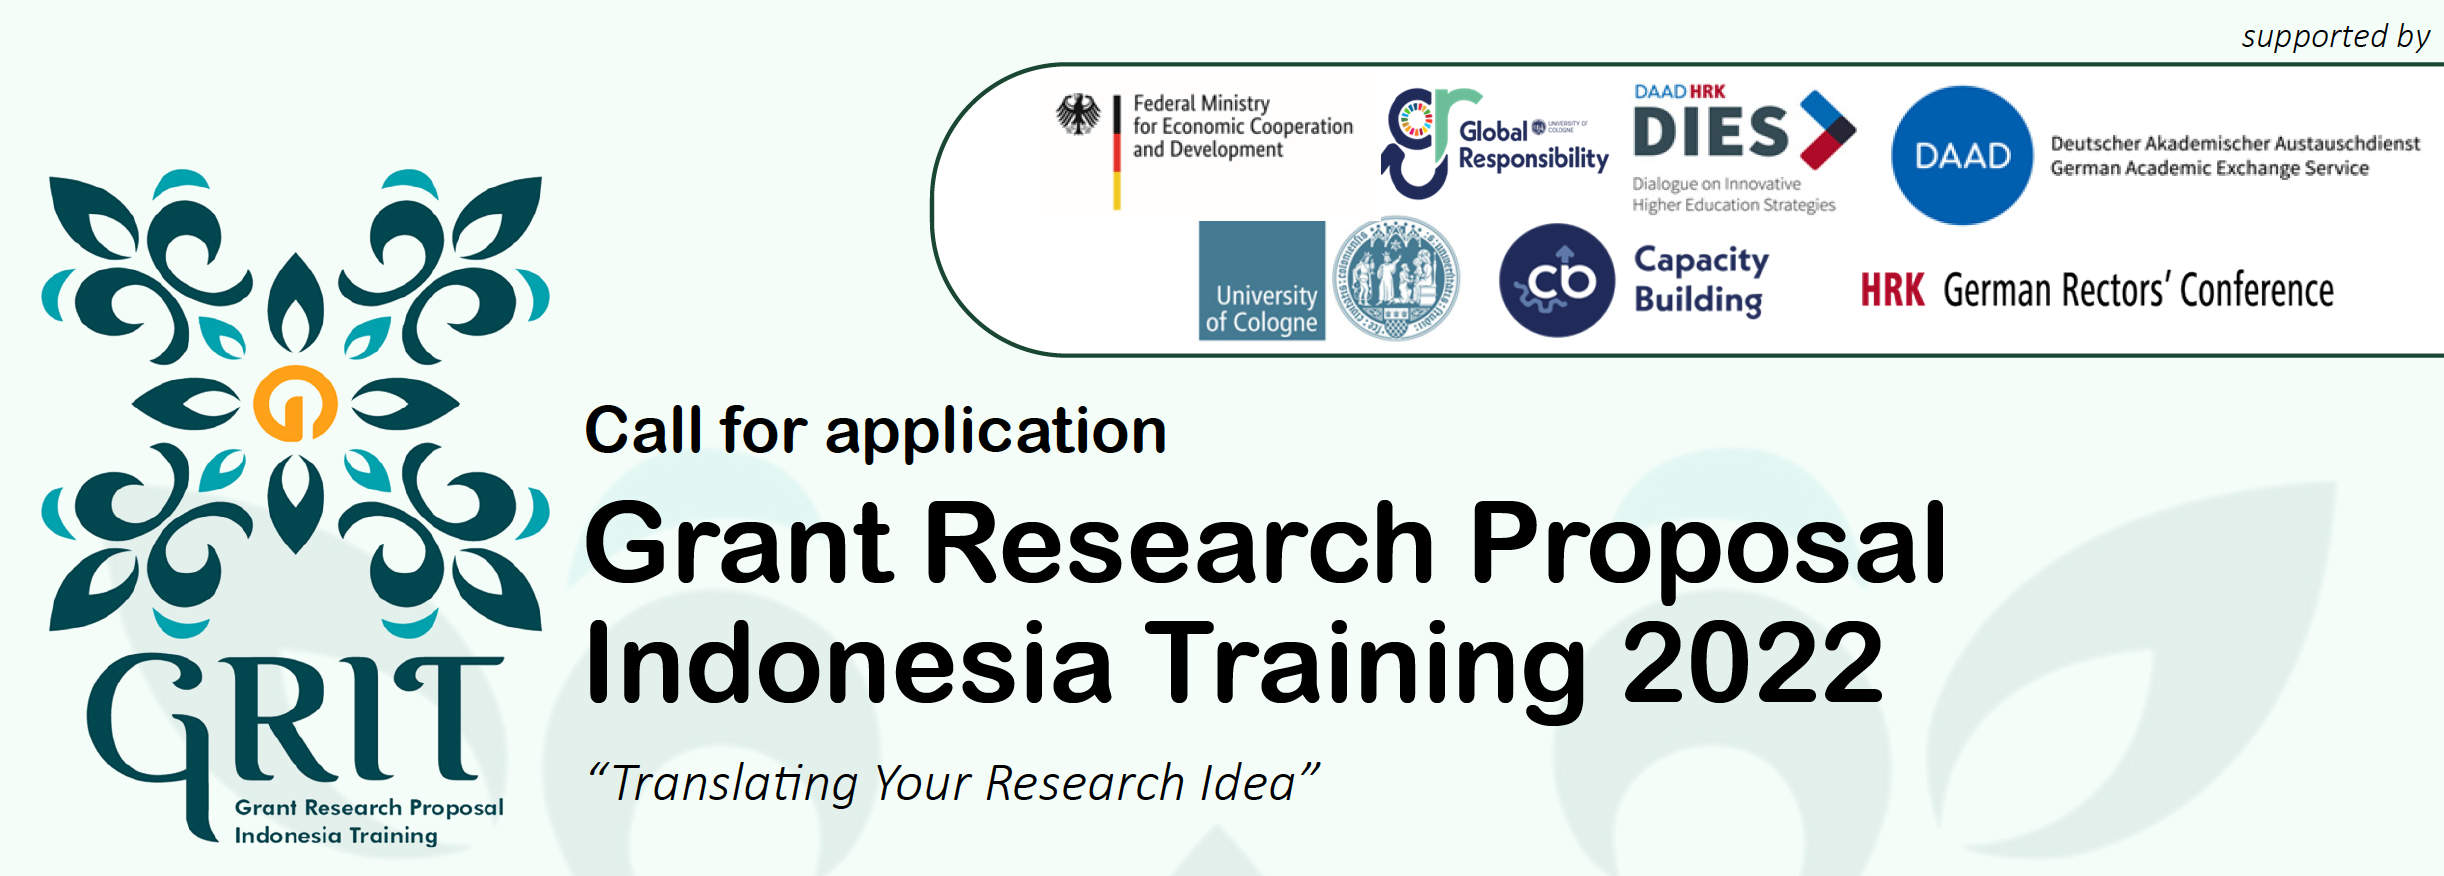 Call for application Grant Research Proposal Indonesia Training 2022